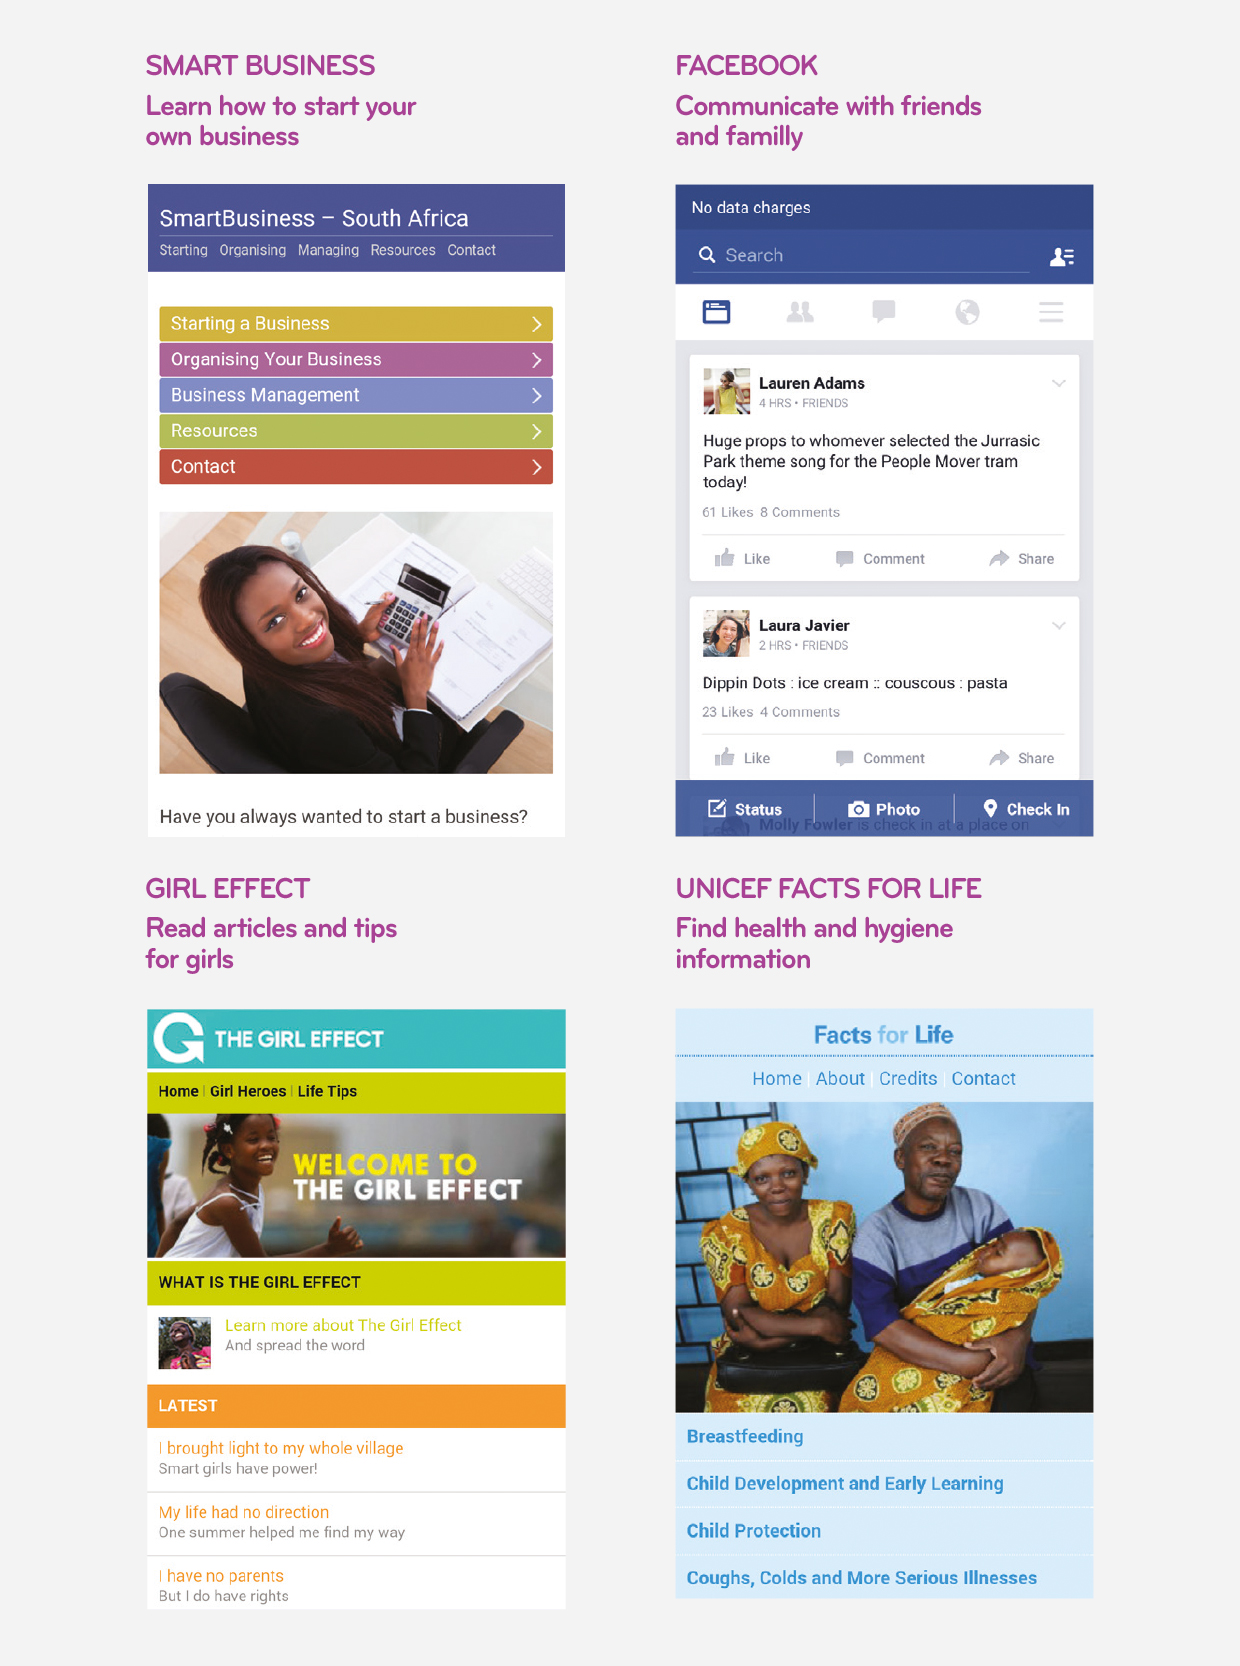 Free Basics by Facebook